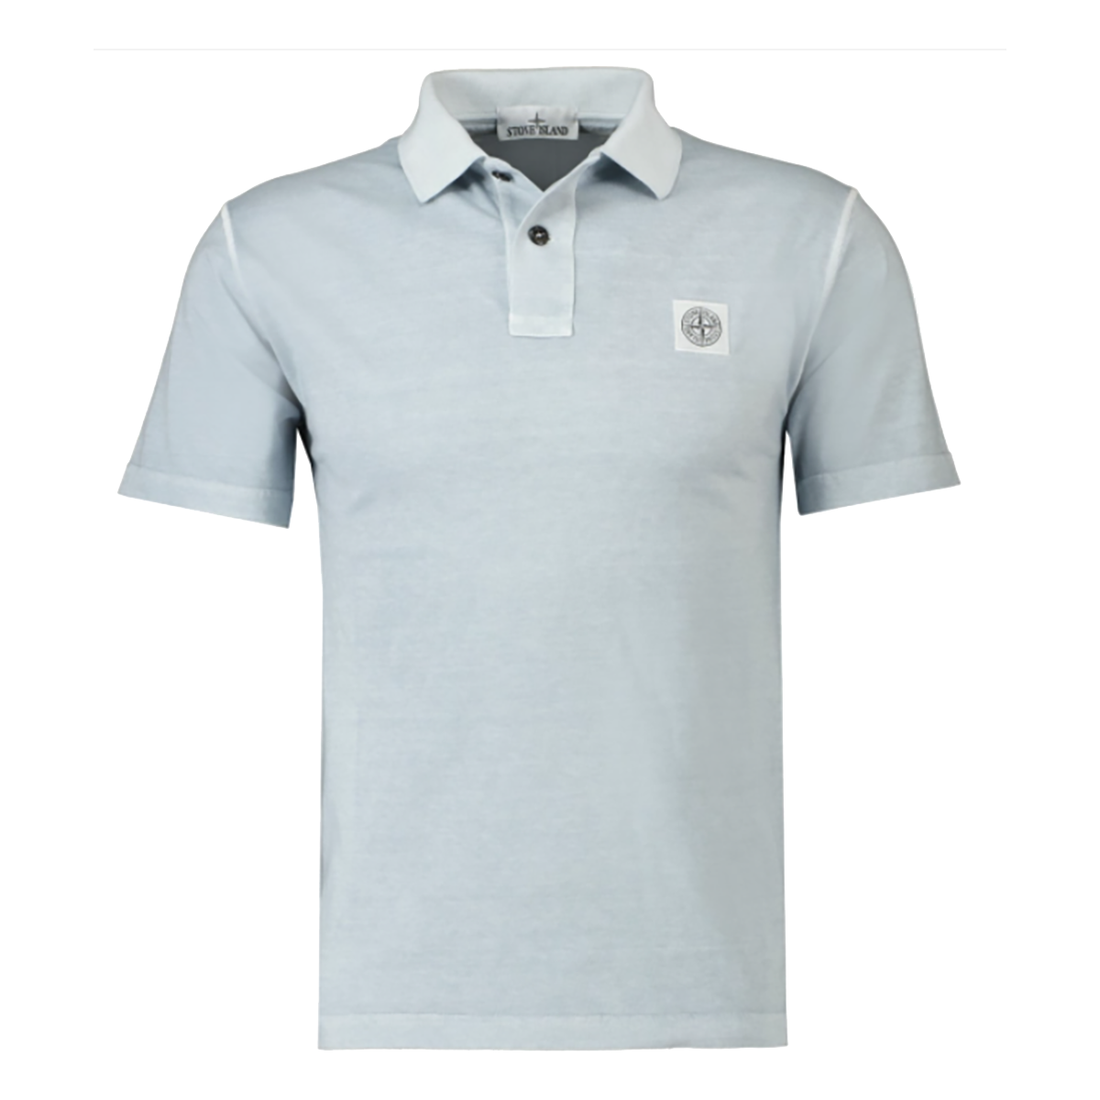 STONE ISLAND LOGO PATCH POLO SHIRT IN BLUE